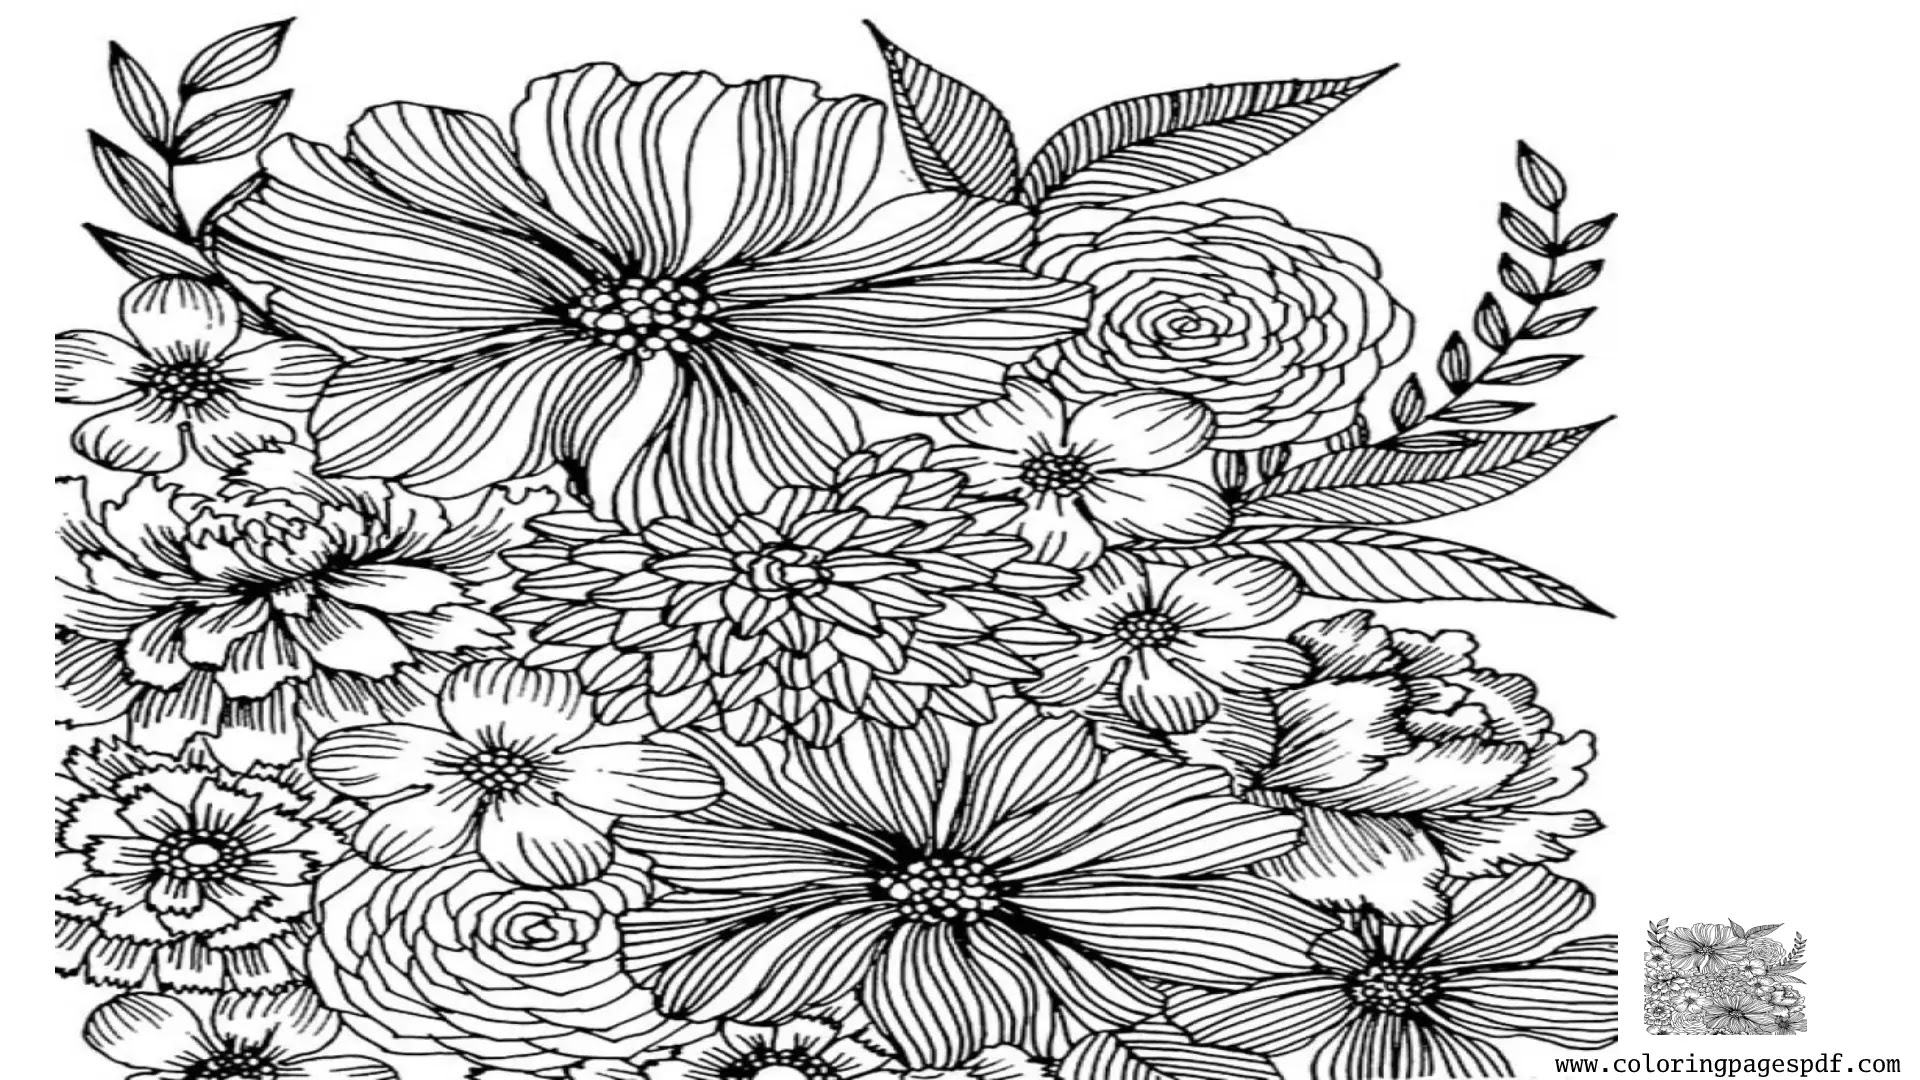 Coloring Page Of Wide Flowers Mandala